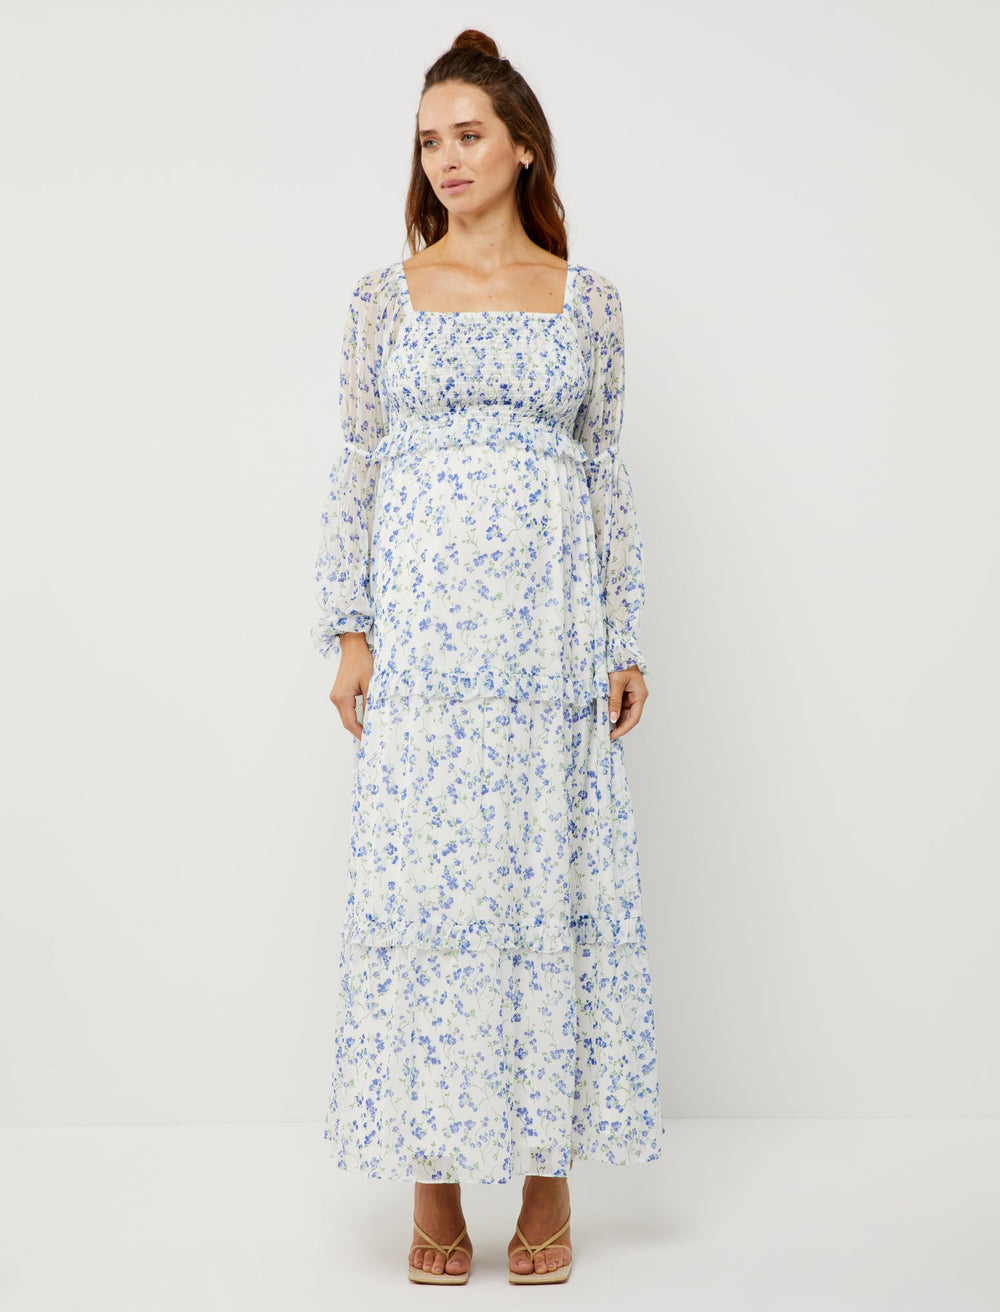 Best Affordable Maternity Clothes for Mom-To-Be